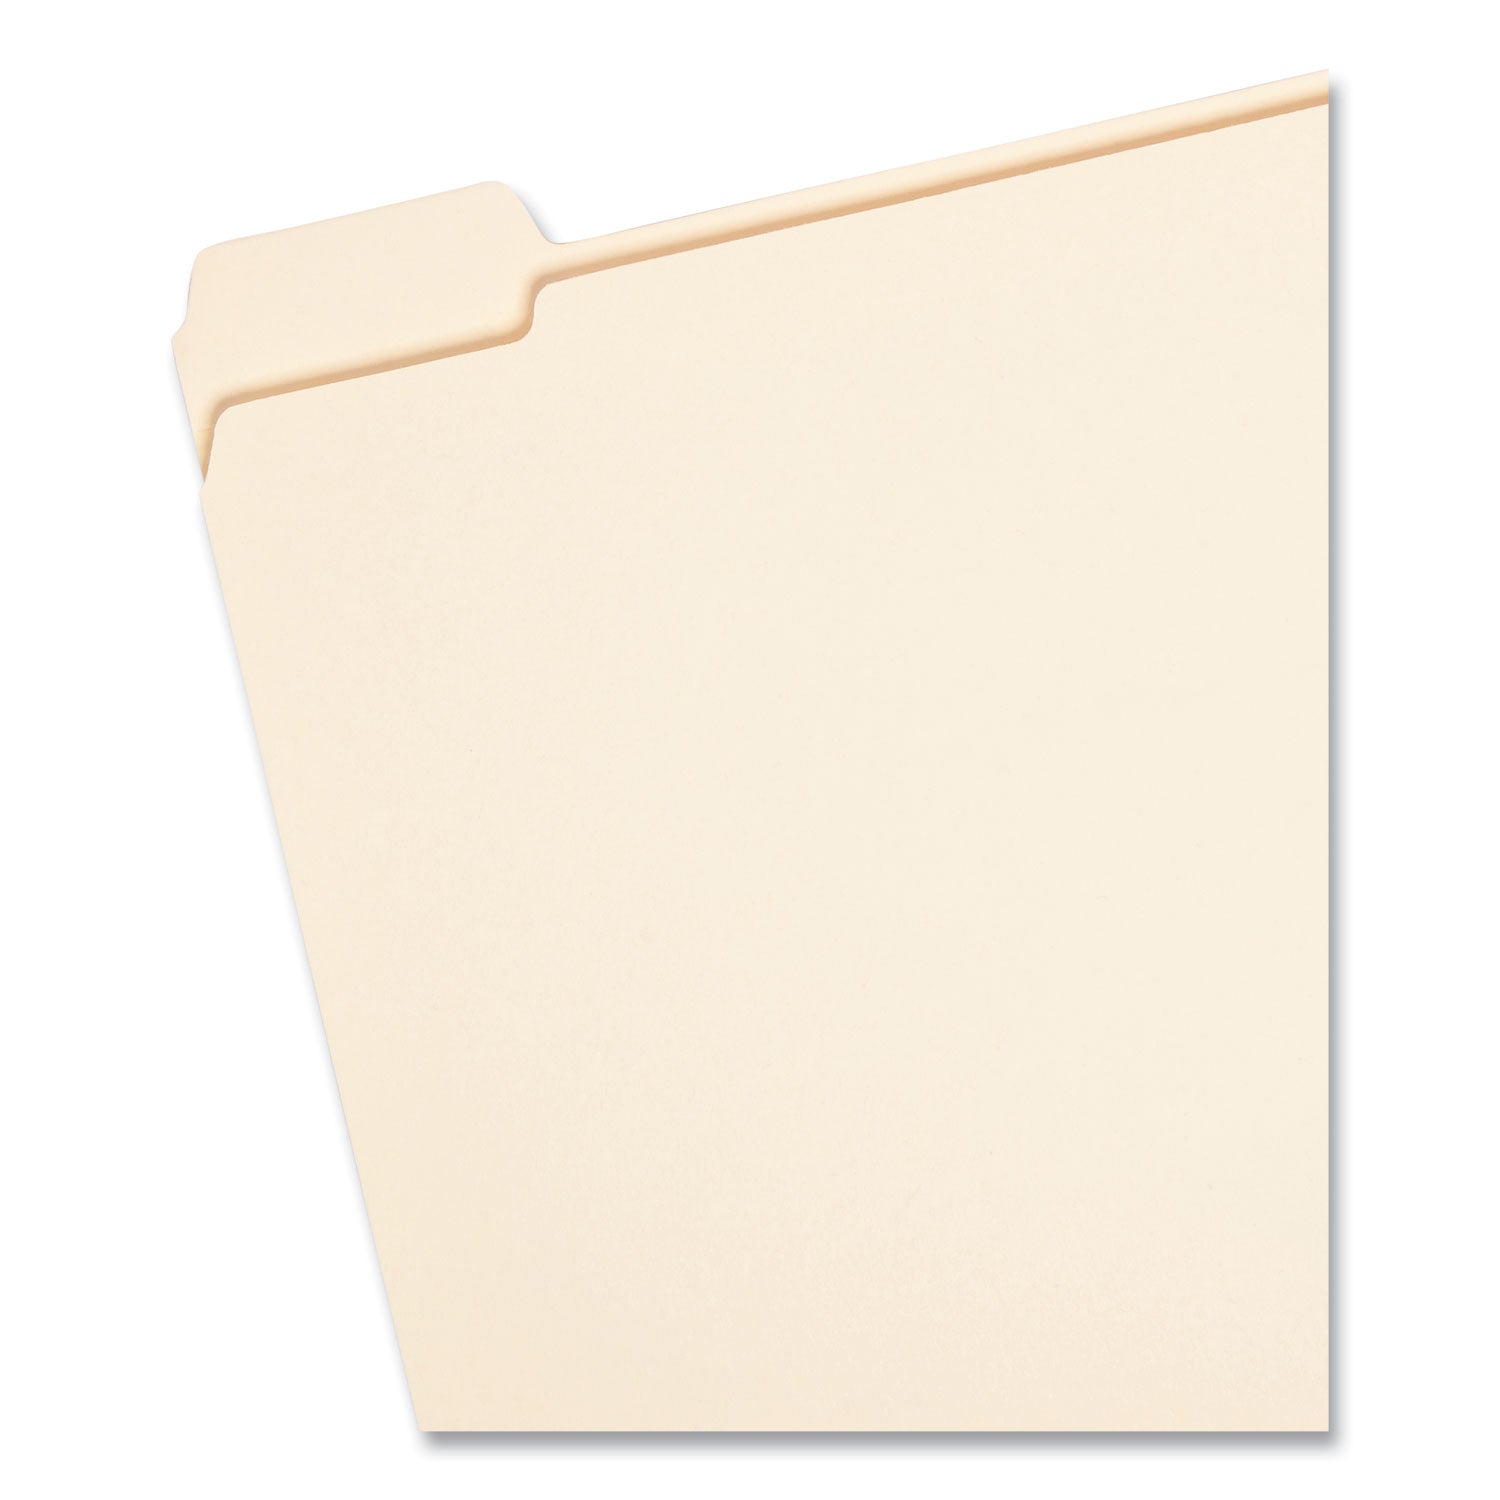 Reinforced Tab Manila File Folders, 1/5-Cut Tabs: Assorted, Letter Size, 0.75" Expansion, 11-pt Manila, 100/Box - 